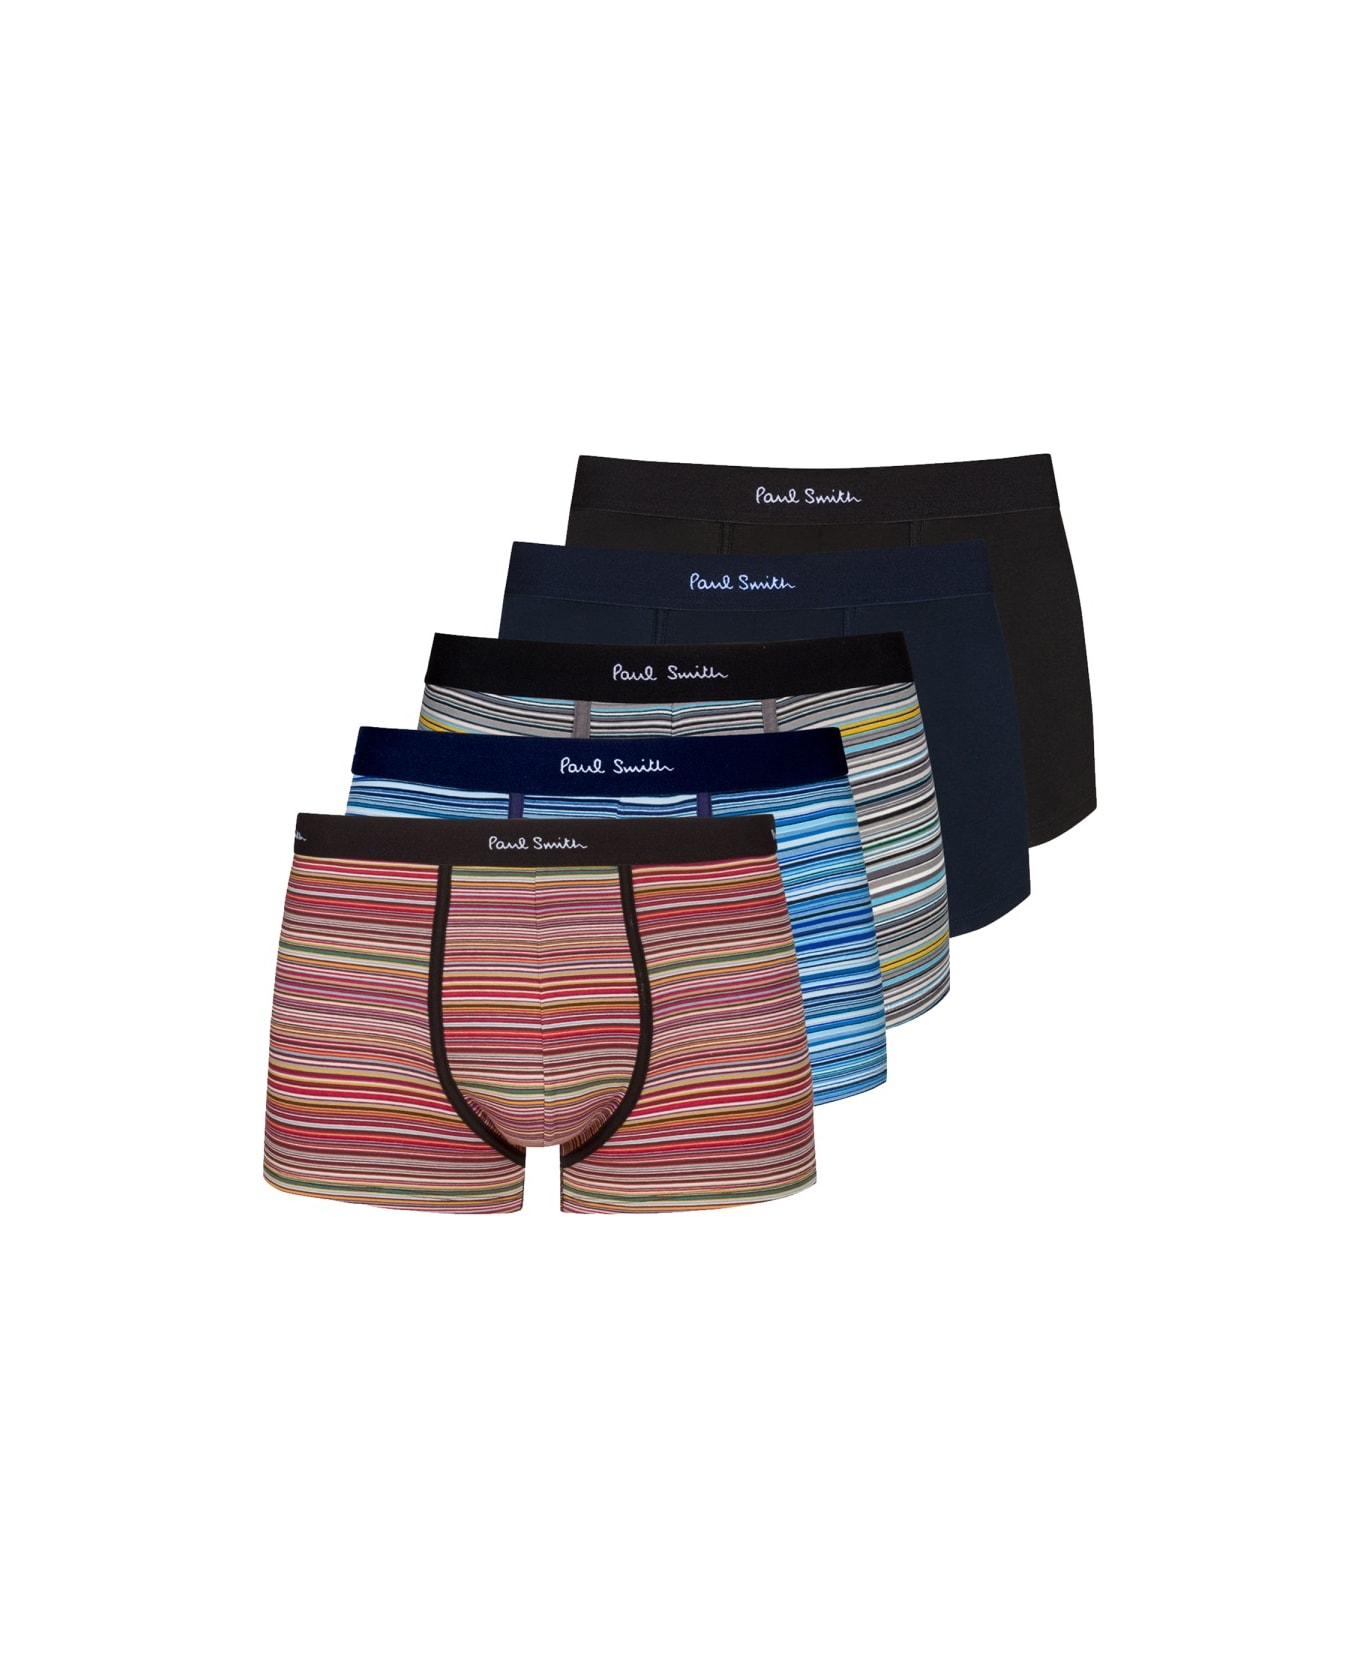 Paul Smith Pack Of Five Boxer Shorts - MULTICOLOR